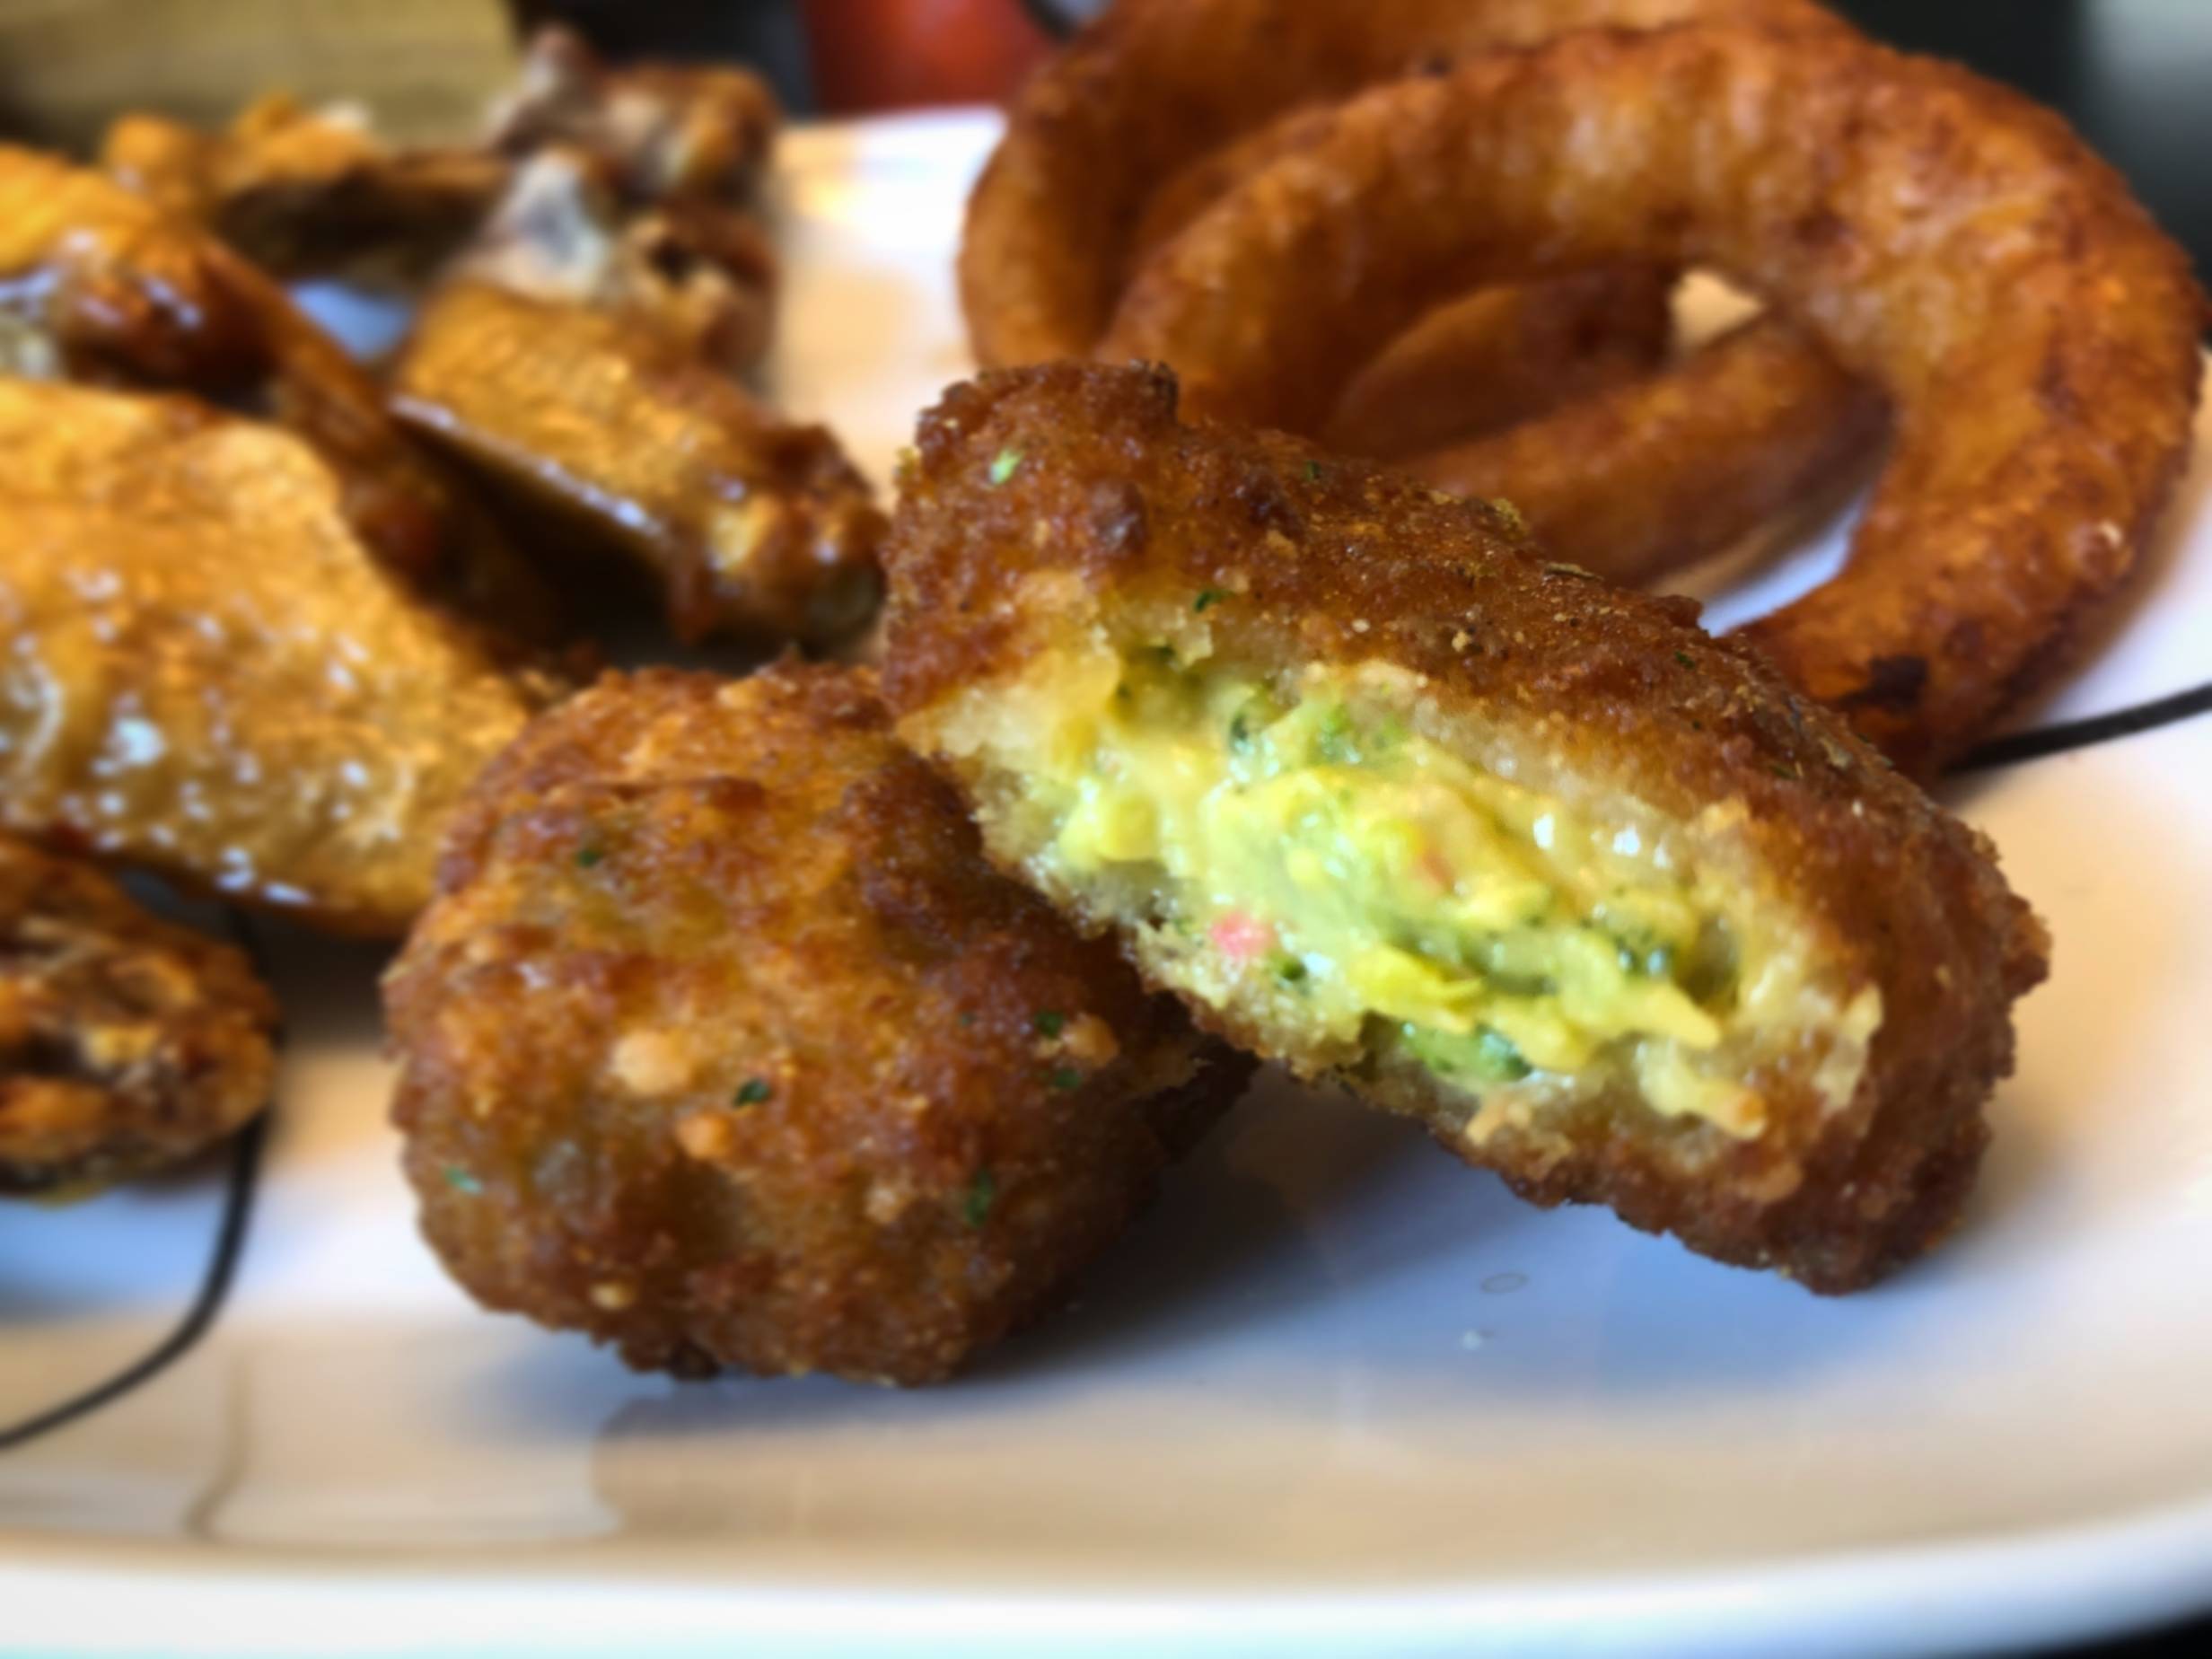 A cut-open broccoli bite reveals the cheesy inside of the fried food. Photo by Alyssa Buckley.